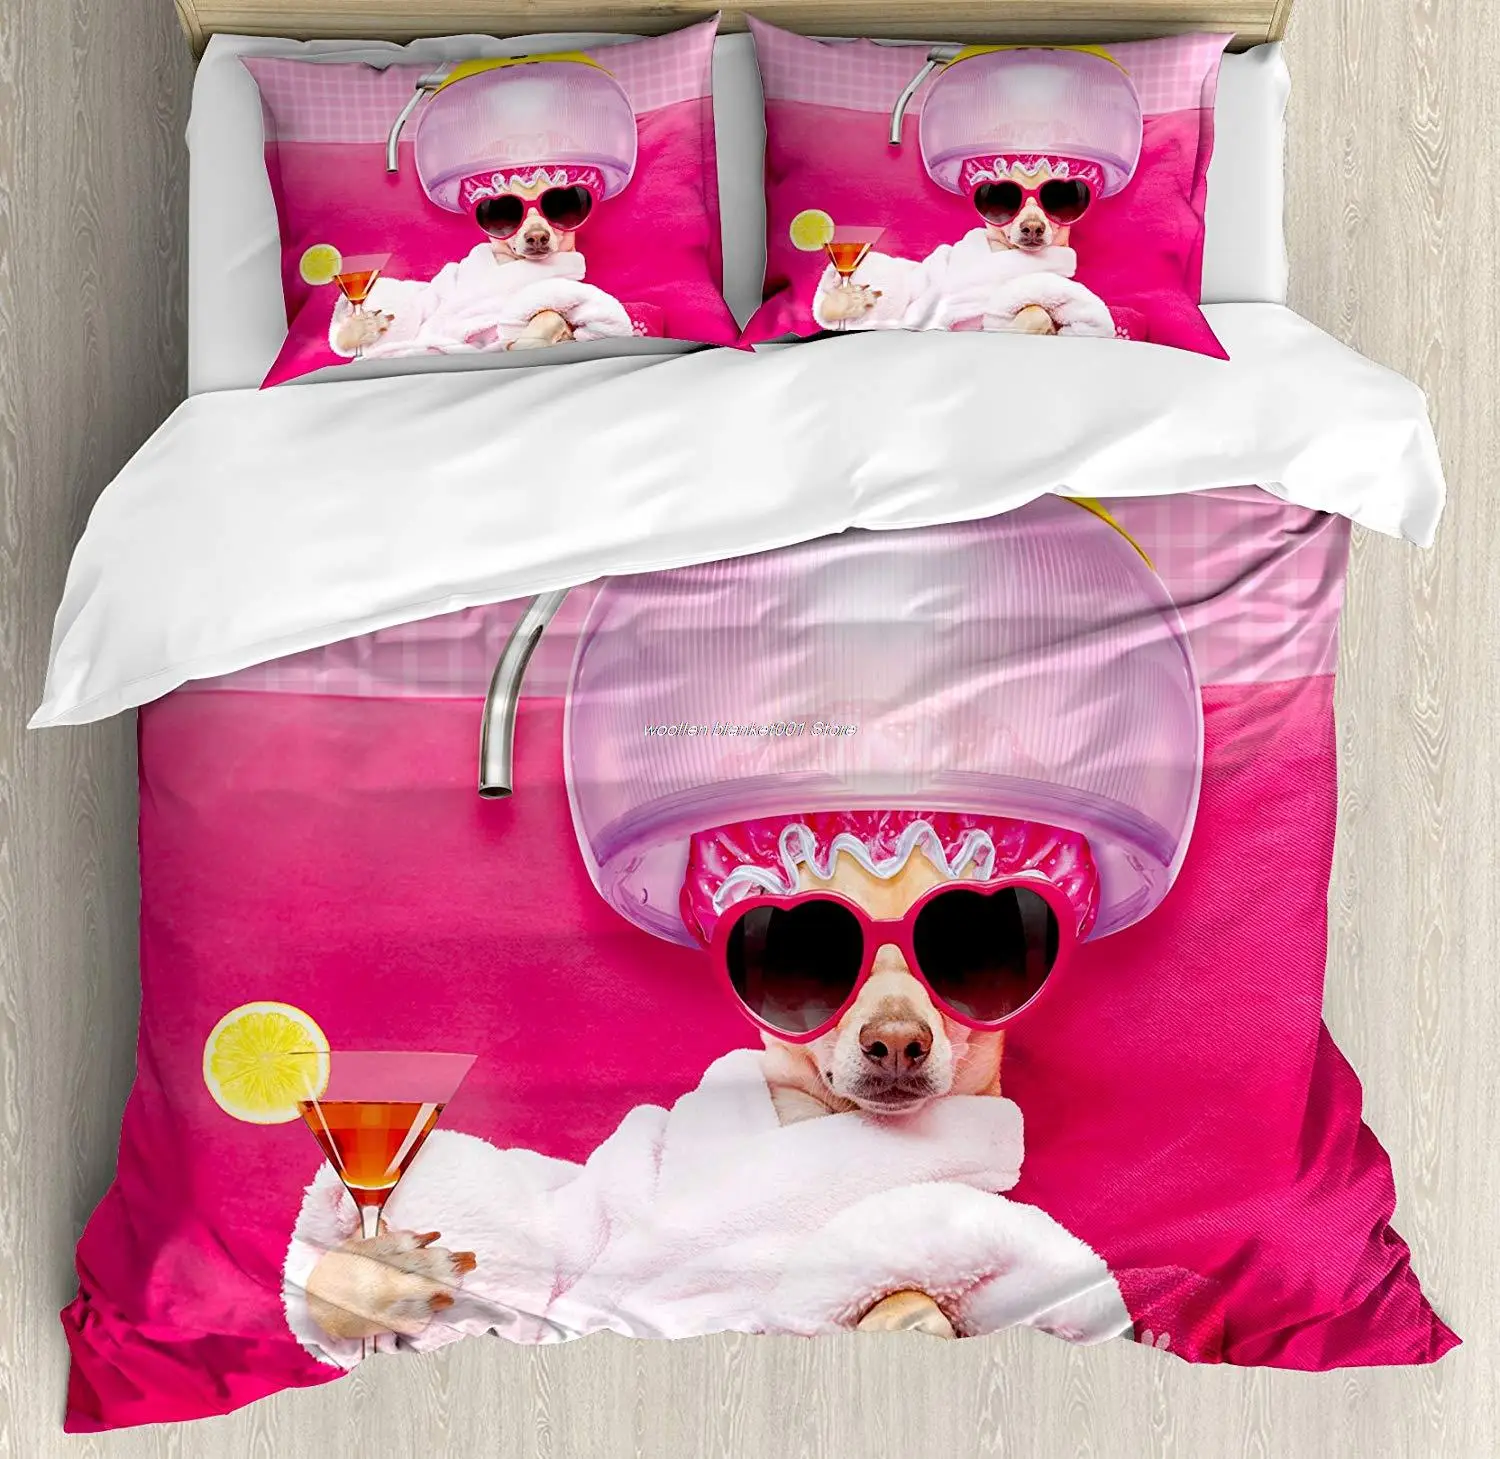 

Funny Duvet Cover Set King Size Chihuahua Dog Relaxing and Lying in Wellness Spa Fashion Puppy Comic Print Decorative 3 Piece